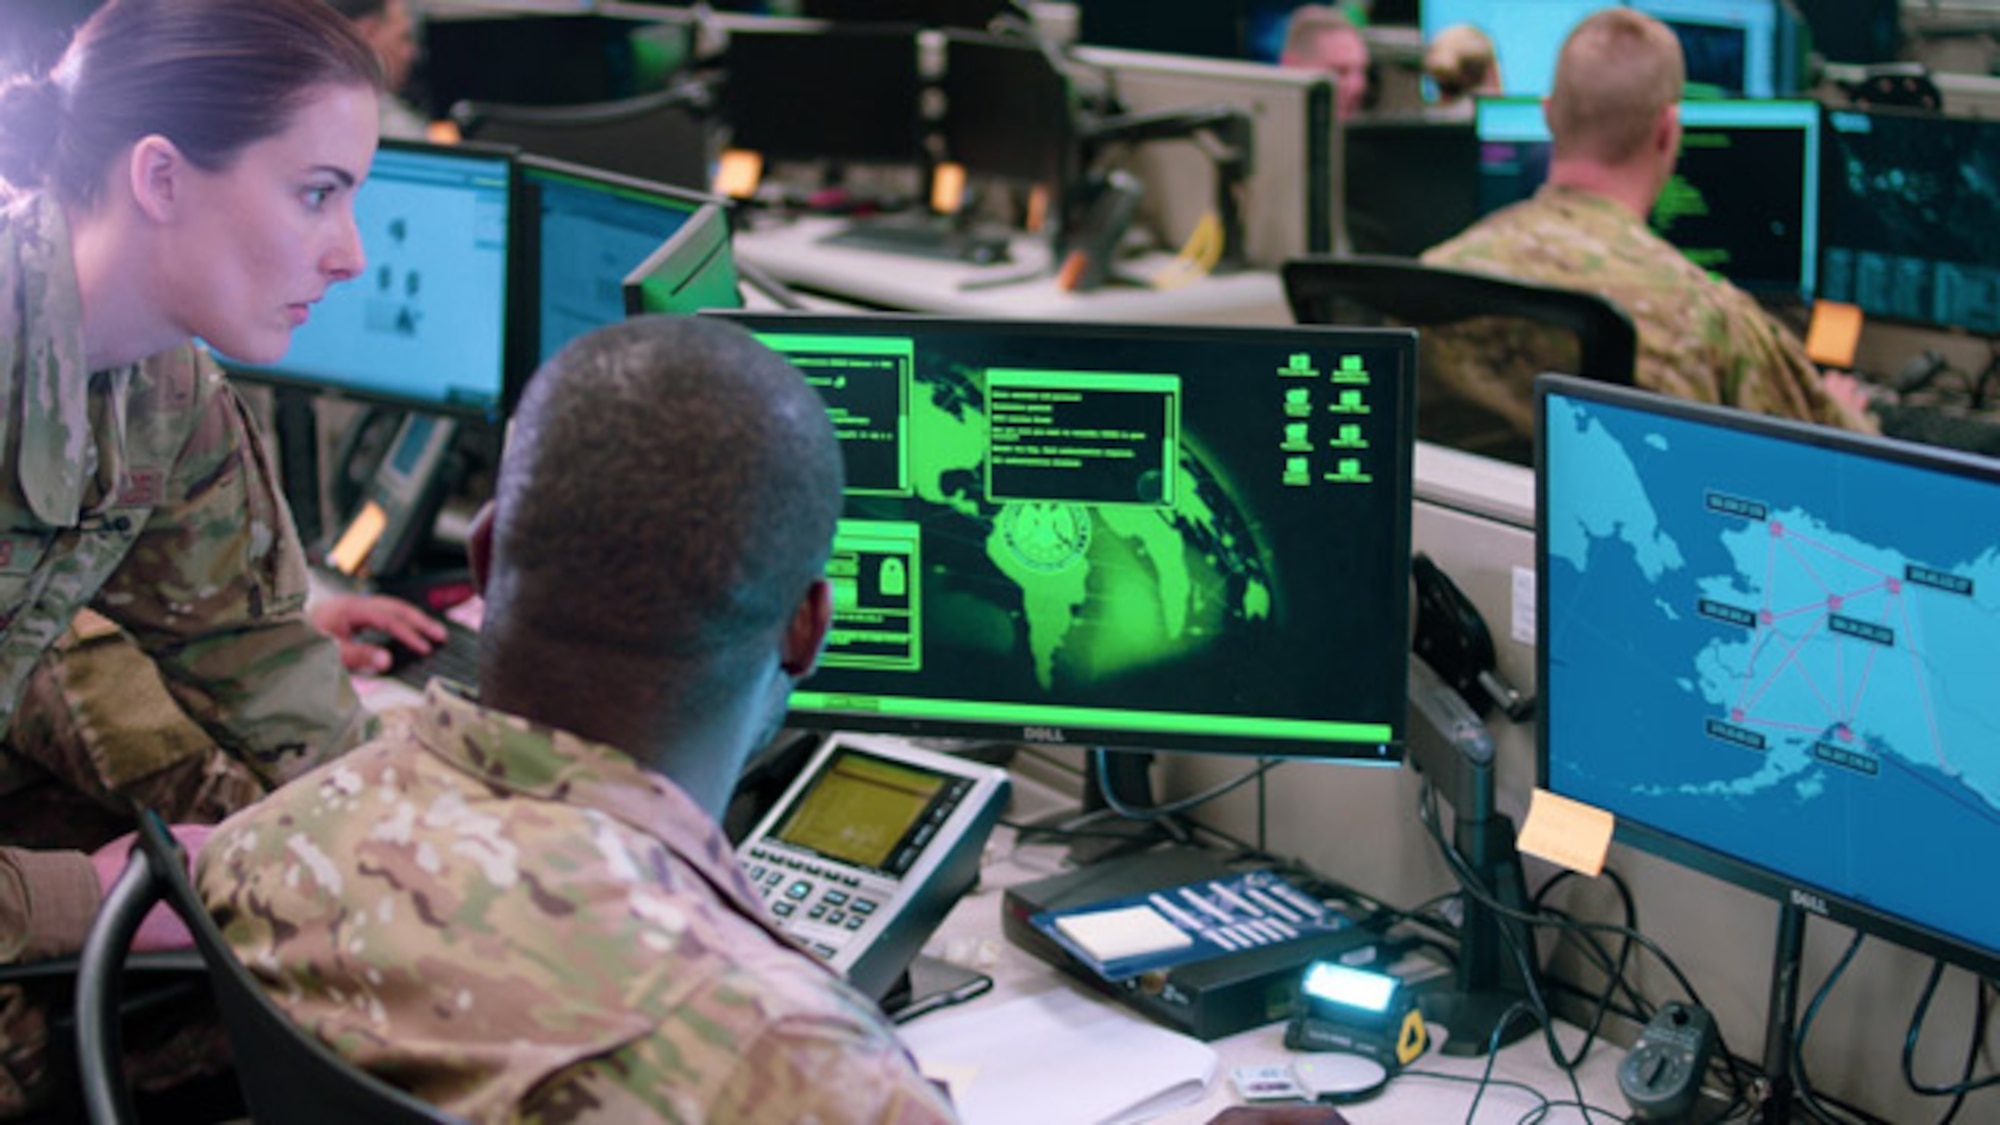 Capt. Sarah Miller and Tech. Sgt. Carrol Brewster, 834th Cyber Operations Squadron, discuss options in response to a staged cyber attack during a drill in June 2019. The Enterprise IT-as-a-Service Integrated Program Office, headquartered at Hanscom Air Force Base, Mass., stood up a Security Operations Center in San Antonio in late February to provide increased cyber threat detection for Buckley Garrison, Colorado, and Offutt Air Force Base, Nebraska. (U.S. Air Force Photo by Maj. Christopher Vasquez)